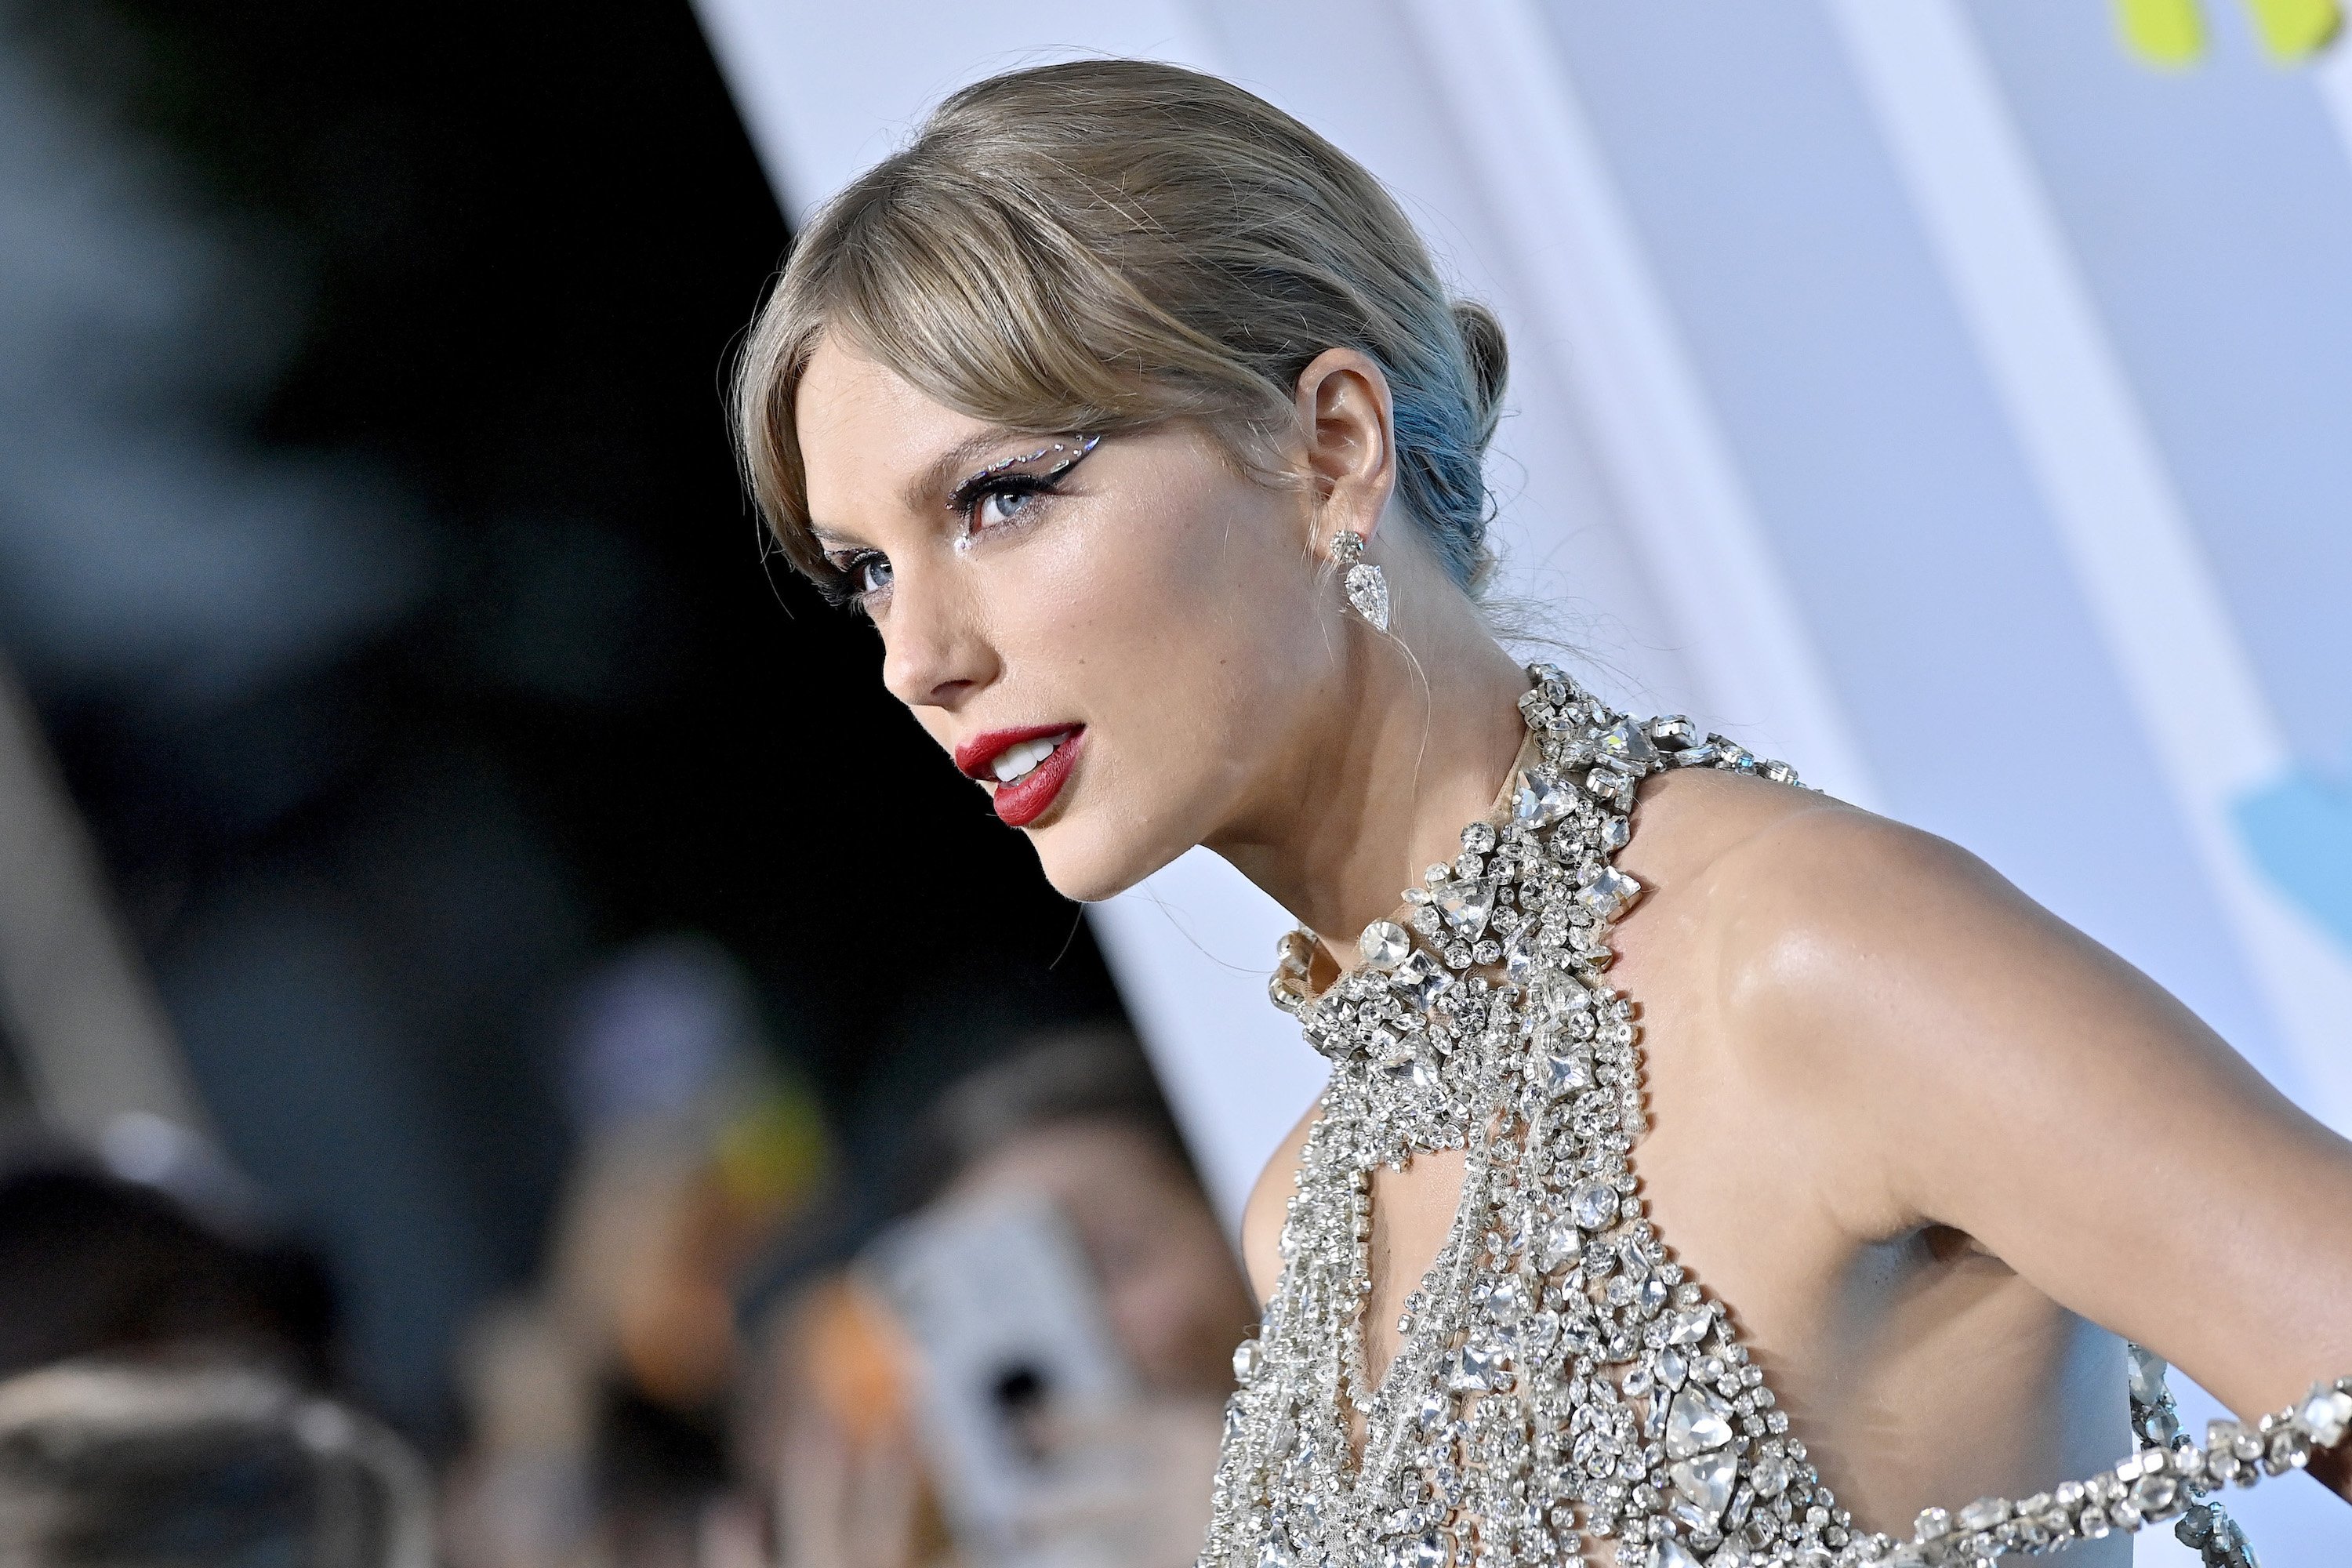 Taylor Swift attends the 2022 MTV Video Music Awards at Prudential Center